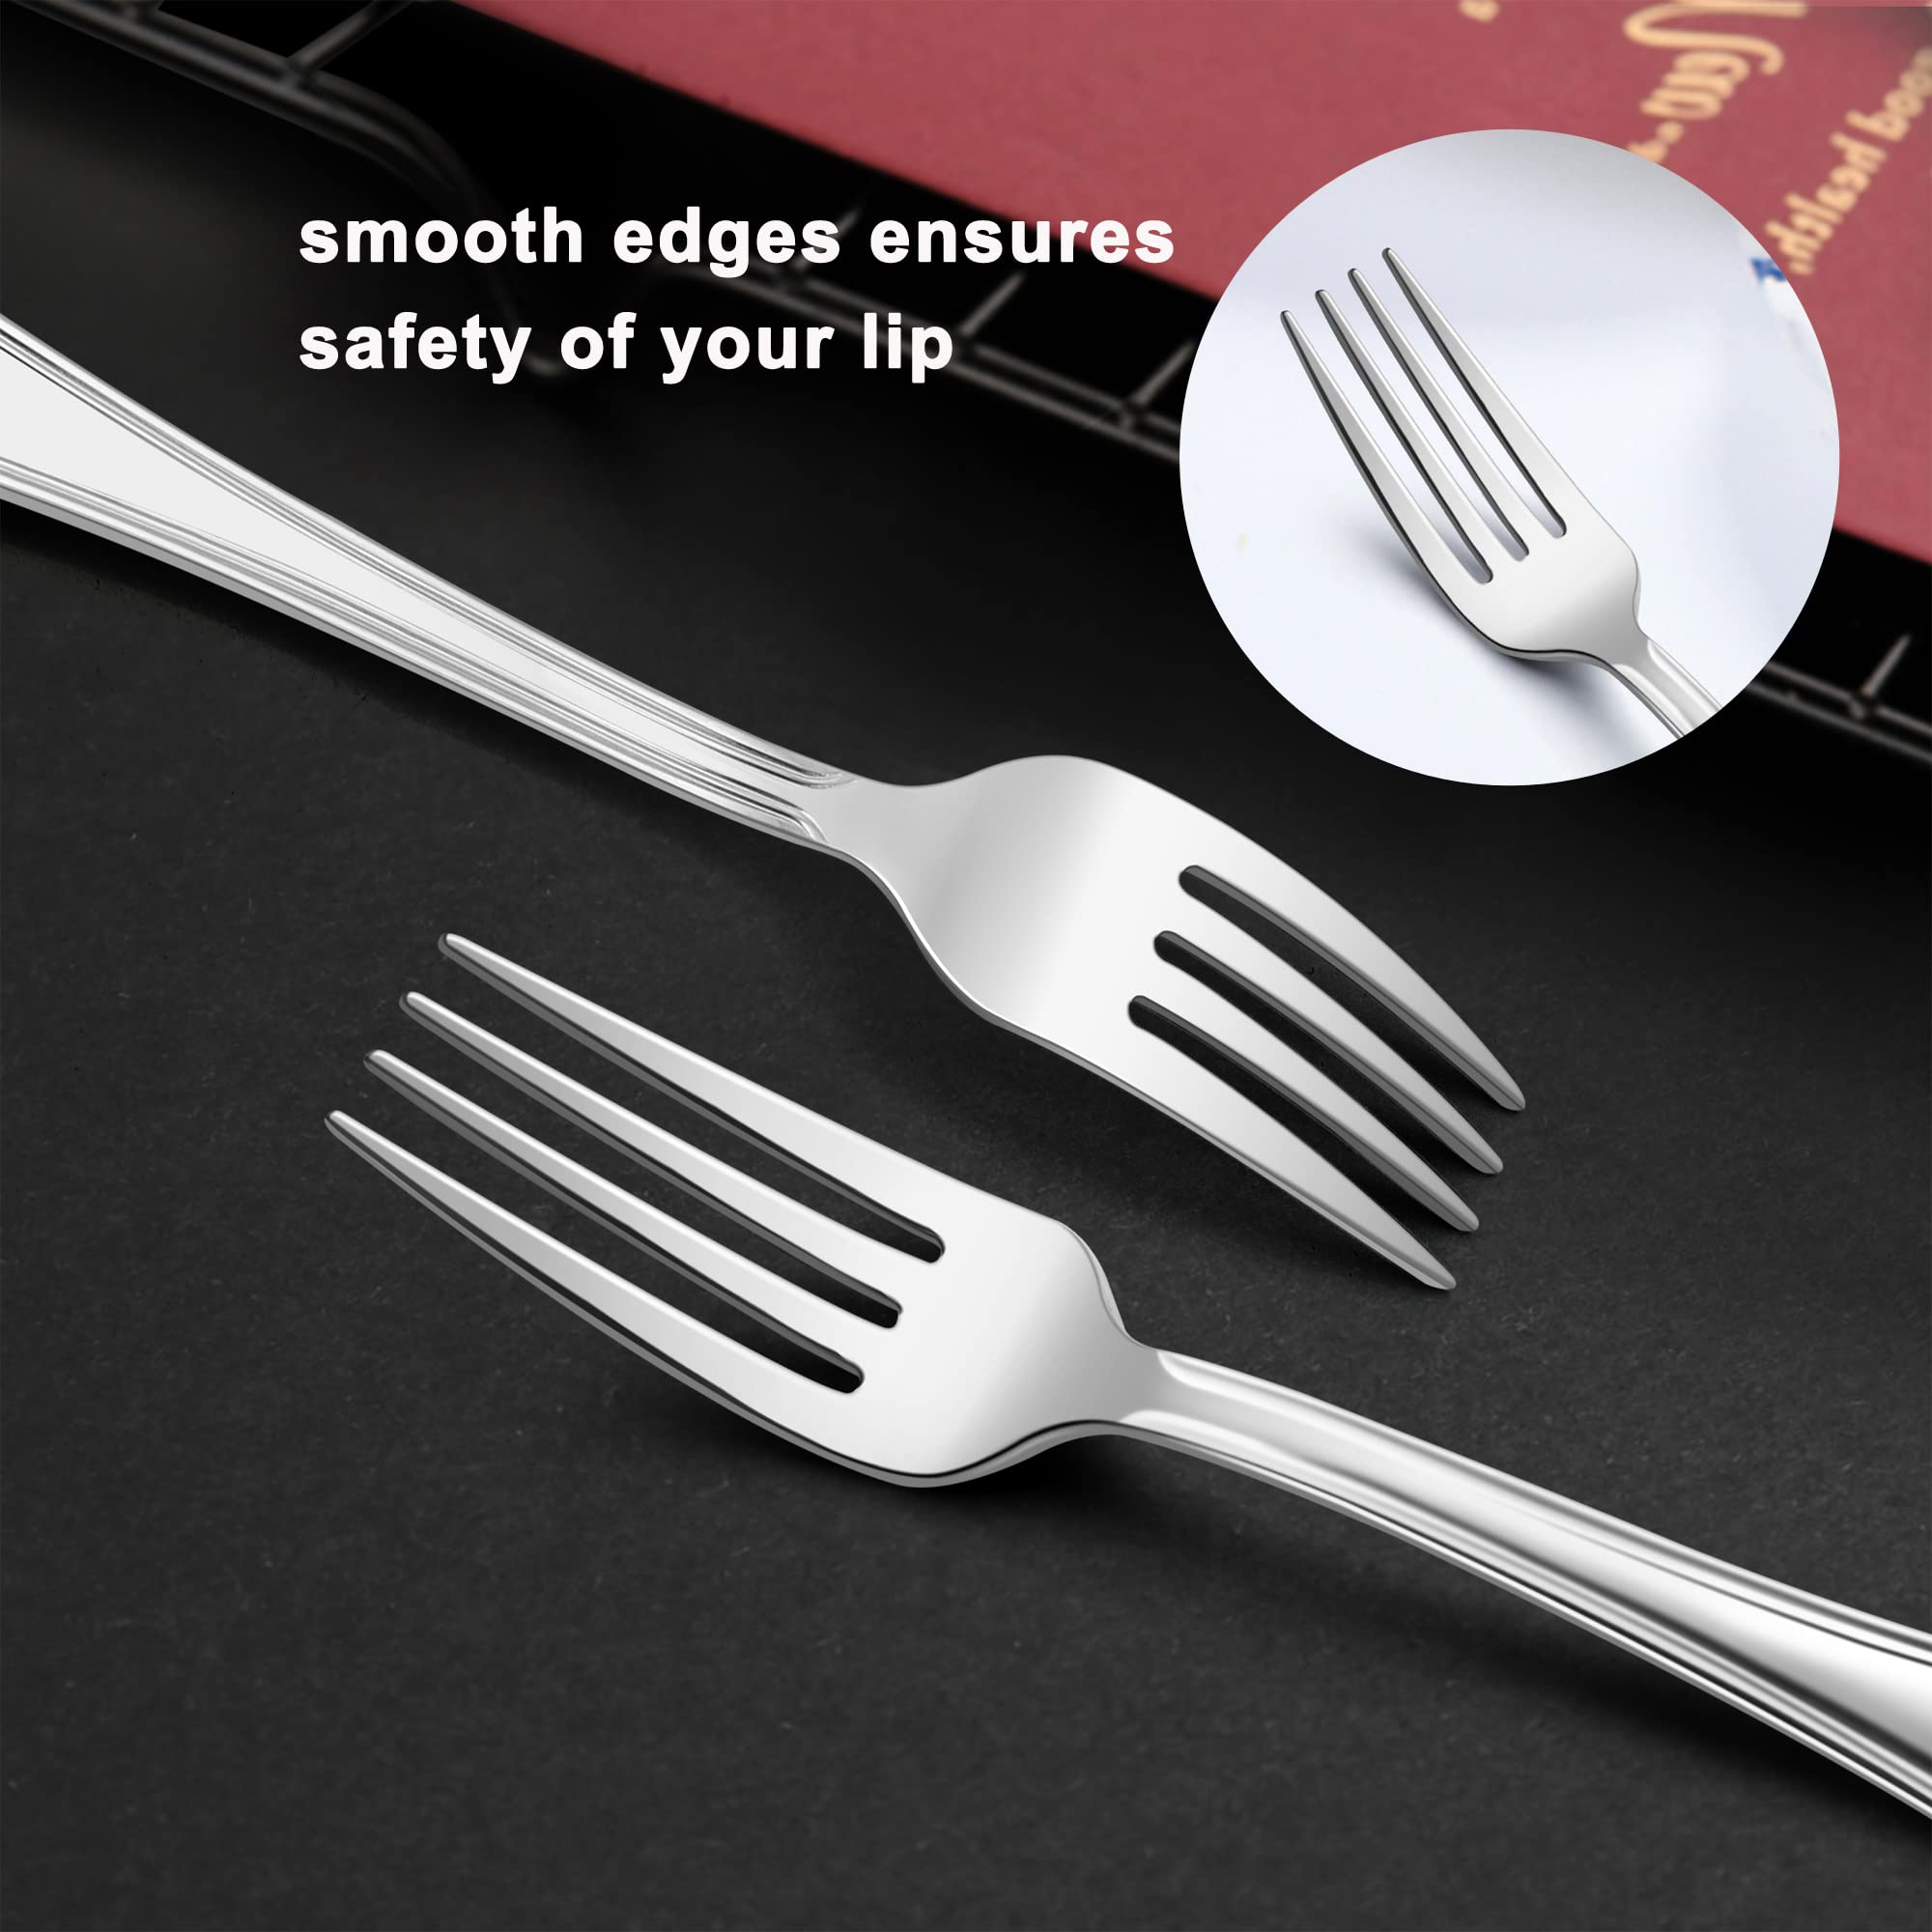 Salad Forks Set of 12, LIANYU 6.7 Inches Stainless Steel Forks Silverware, Appetizer Dessert Forks with Scalloped Edge, Cutlery Flatware Forks for Home Restaurant, Dishwasher Safe